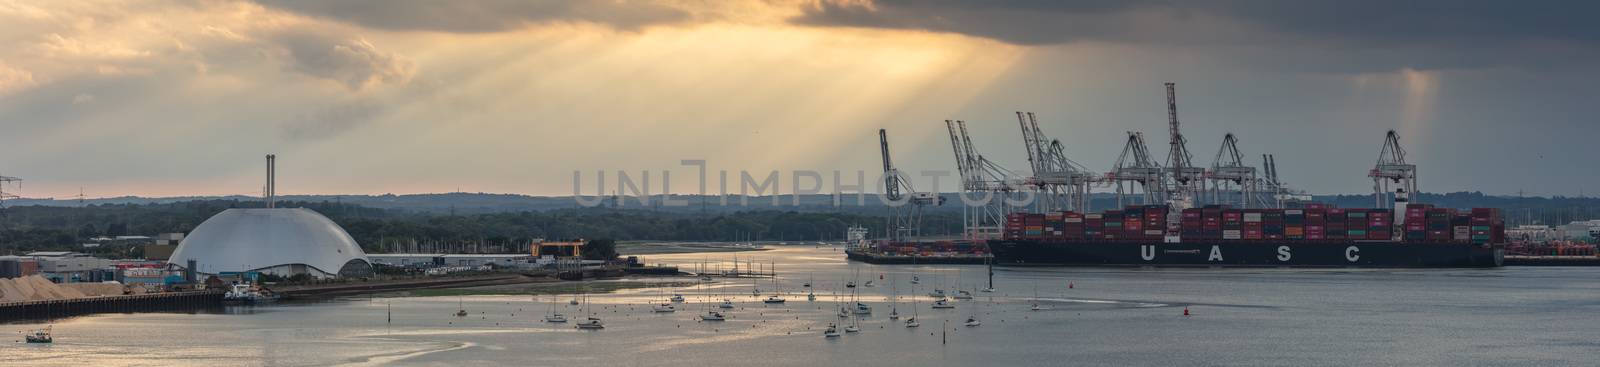 Southampton port, England, UK - June 08, 2020: Aerial panoramic view of Southampton port at sunset. Golden hour. Massive container ship UASC being loaded; yacht lot, metal factory dome in the middle